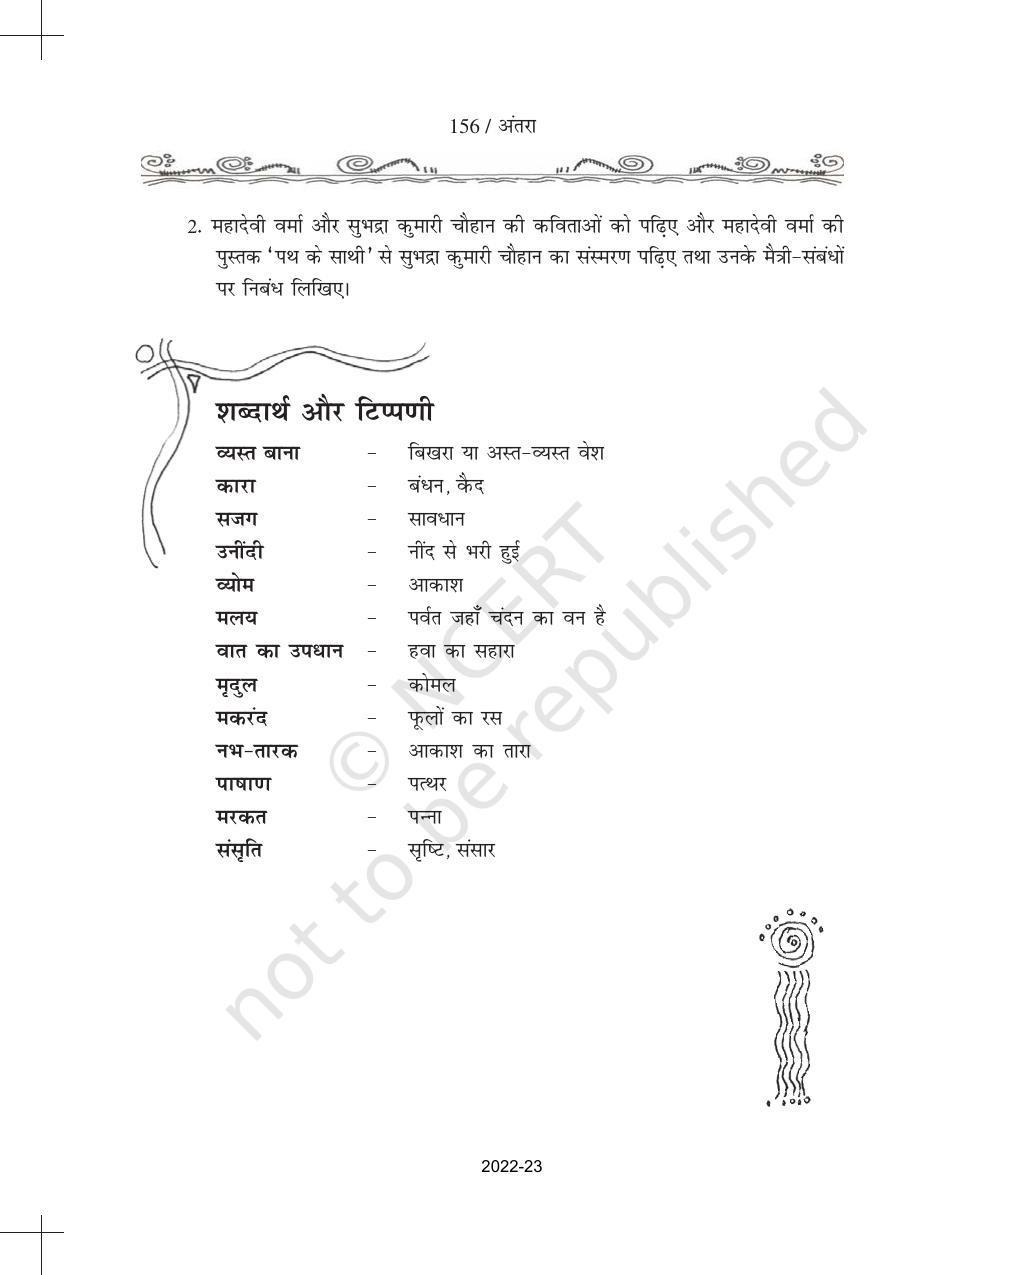 NCERT Book for Class 11 Hindi Antra Chapter 15 महादेवी वर्मा - Page 7